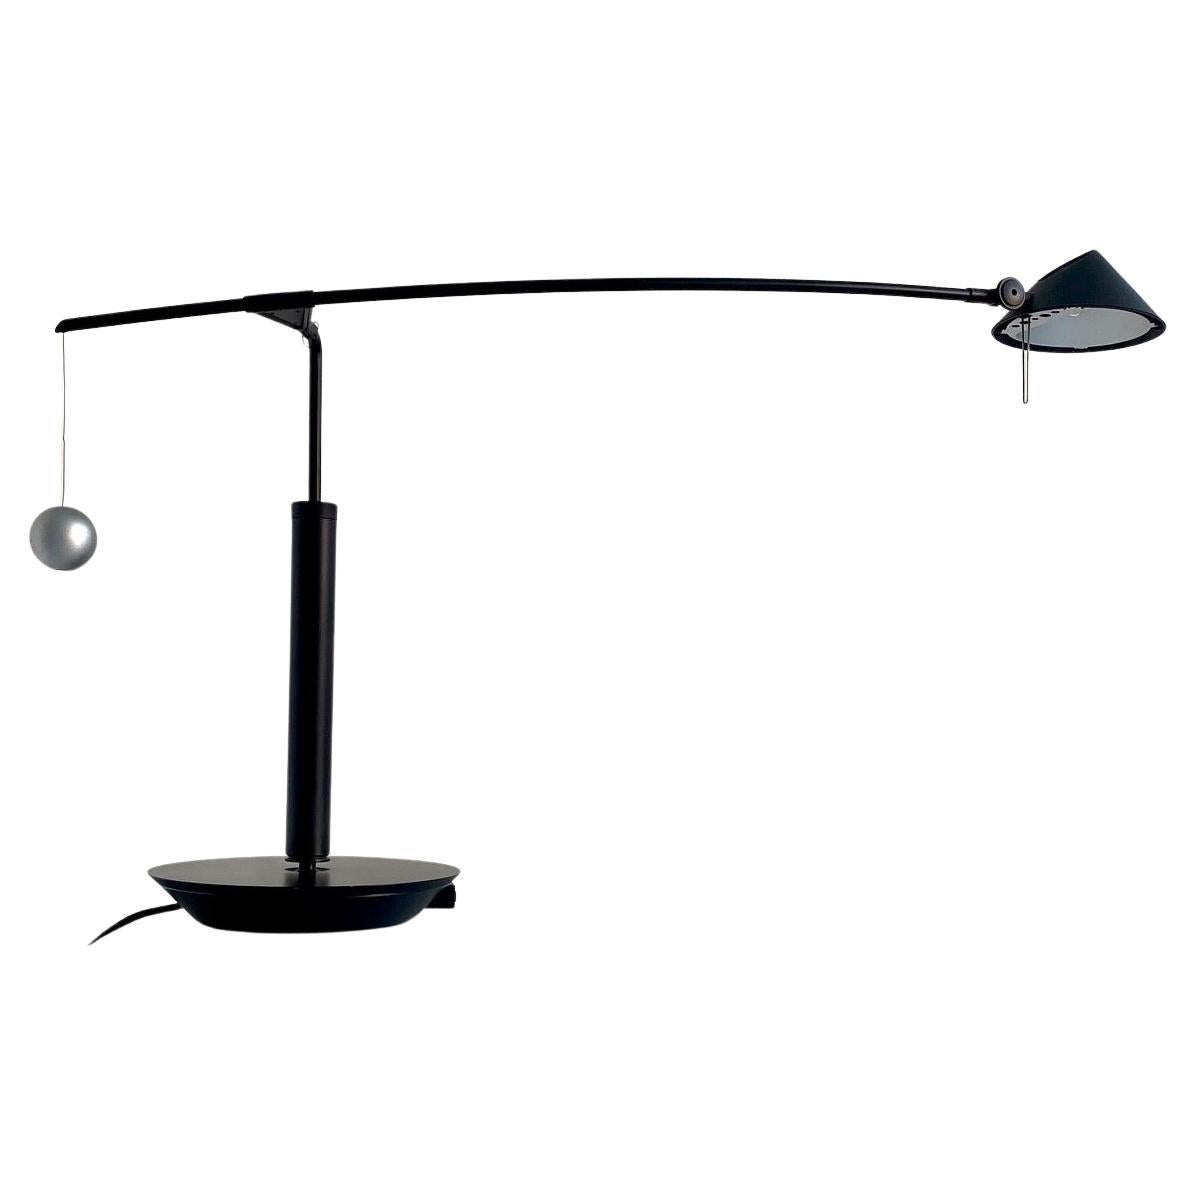 Beautiful lamp nestore lettura by Carlo Forcolini for Artemide, Italy 1991. 
Structure in black lacquered metal and plastic, counterweight ball in grey lacquered metal. 
The arm of the lamp is adjustable vertically and horizontally. 
Functional